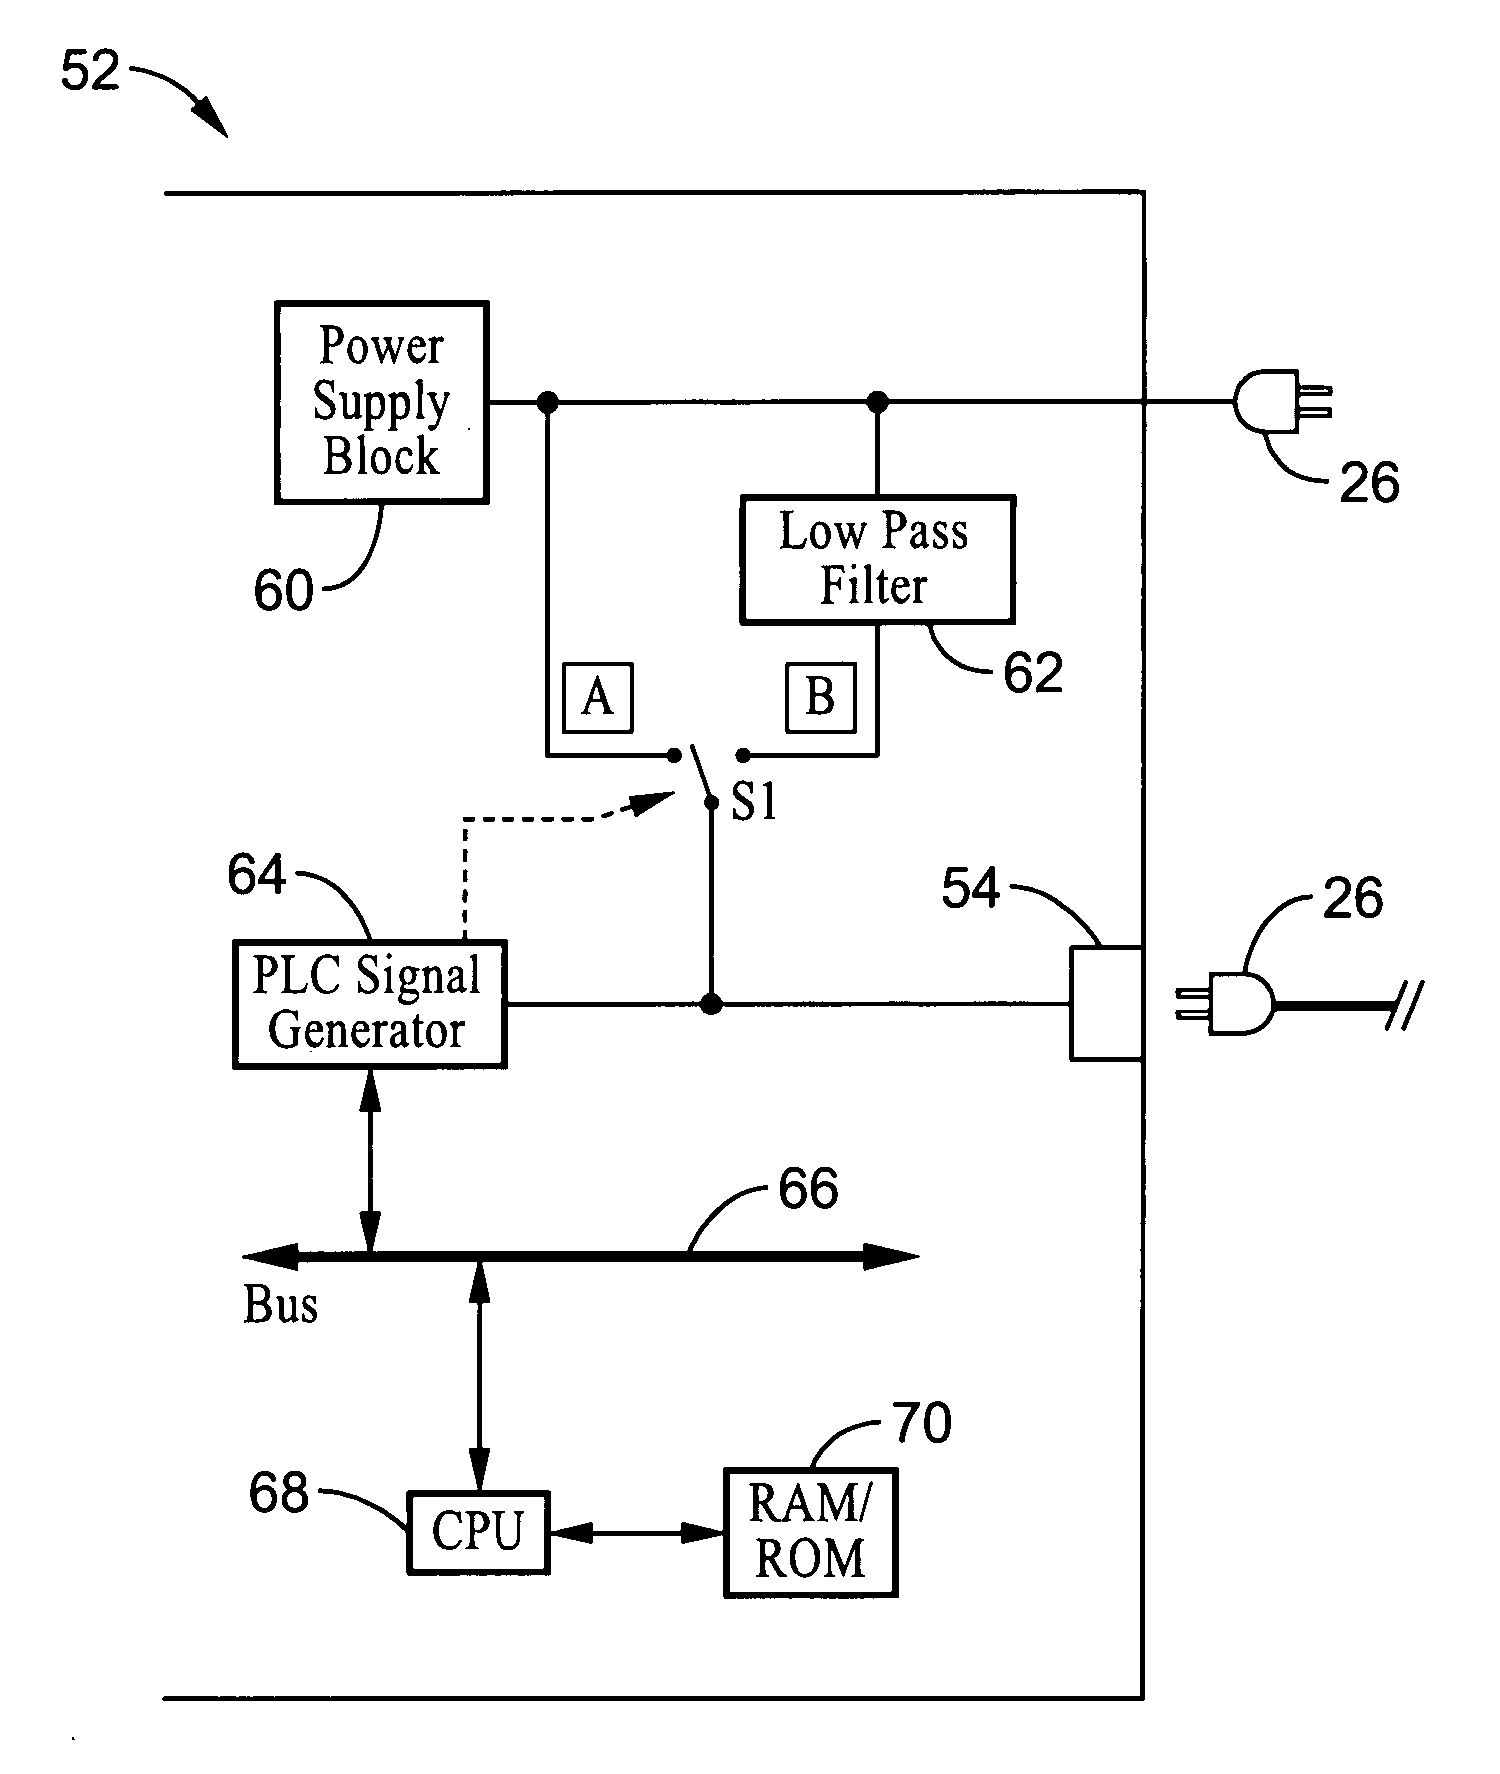 System and method for authenticating/registering network device in power line communication (PLC)